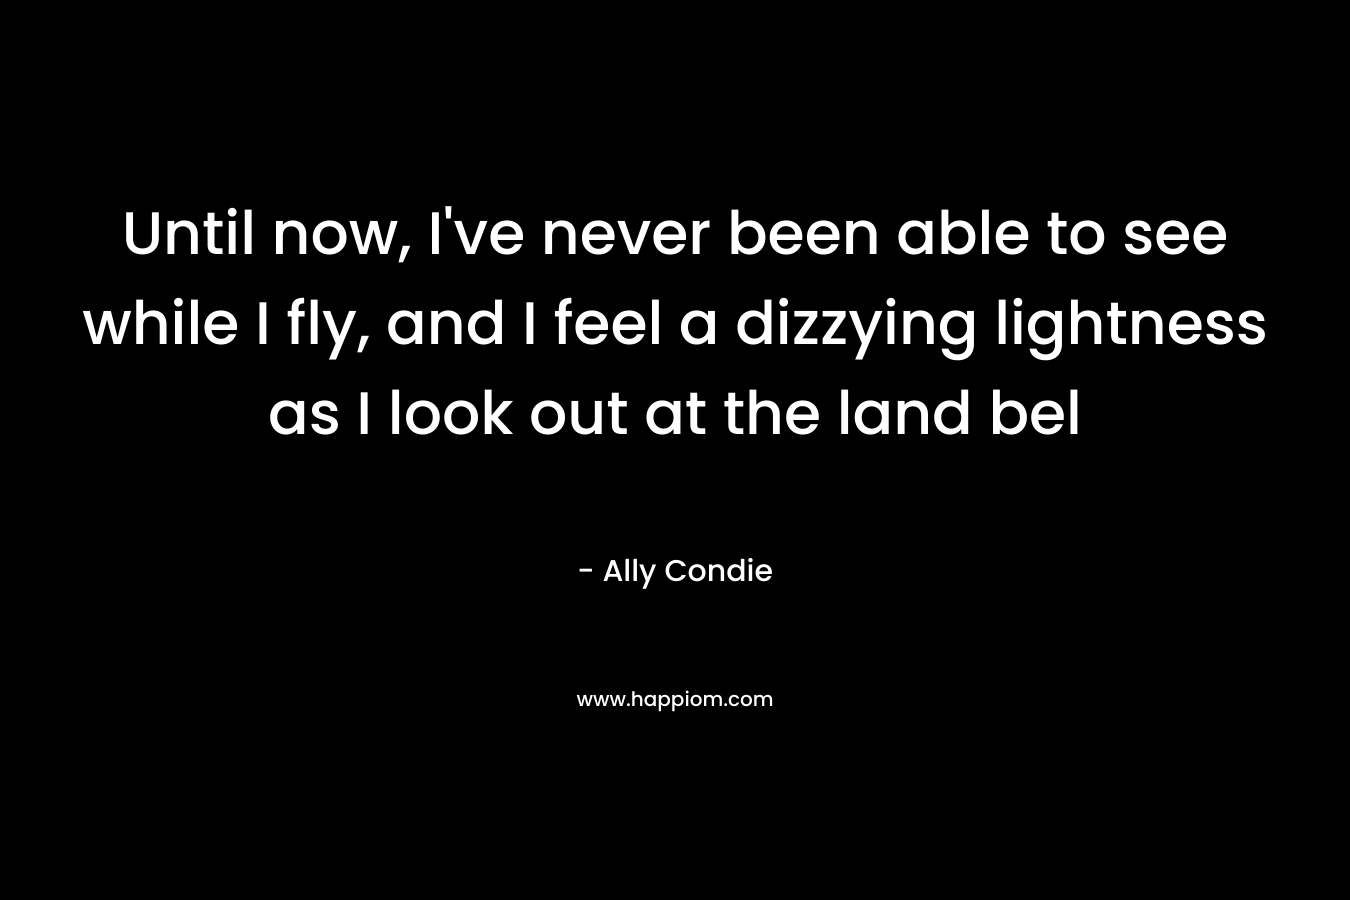 Until now, I’ve never been able to see while I fly, and I feel a dizzying lightness as I look out at the land bel – Ally Condie